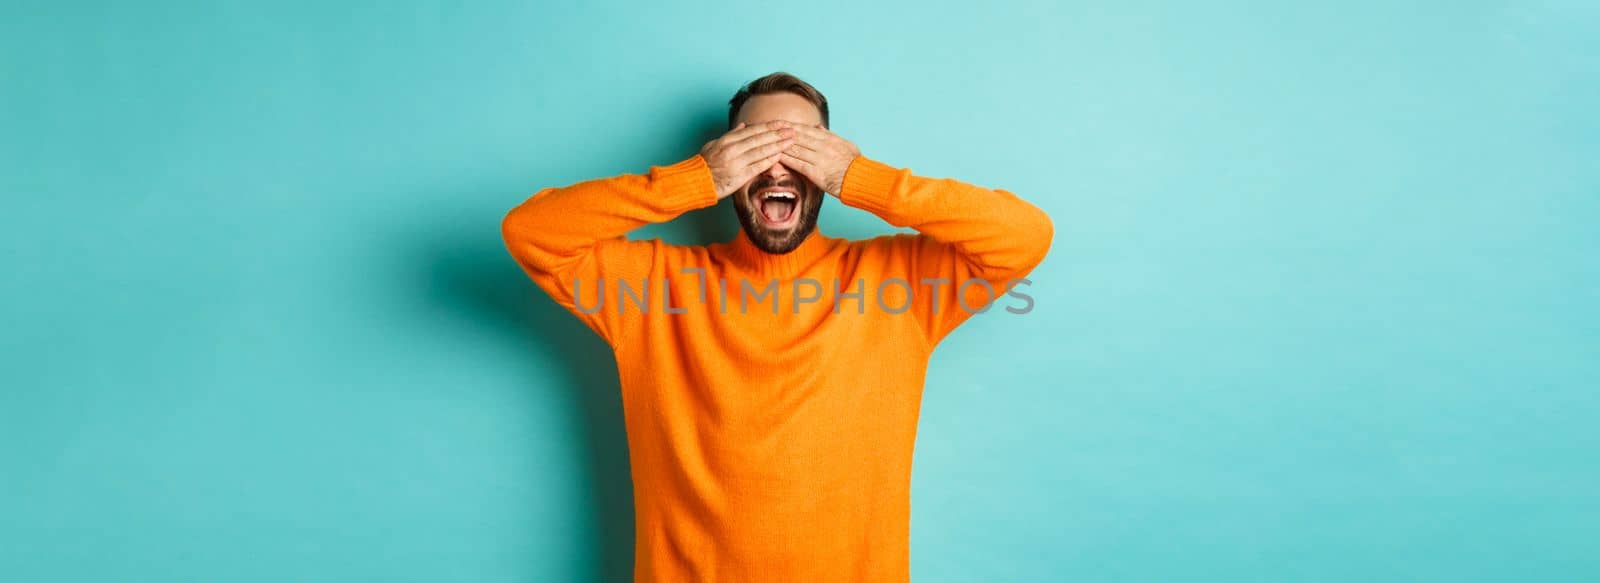 Happy bearded man waiting for surprise, shut ears and expeting gifts, standing over light blue background.